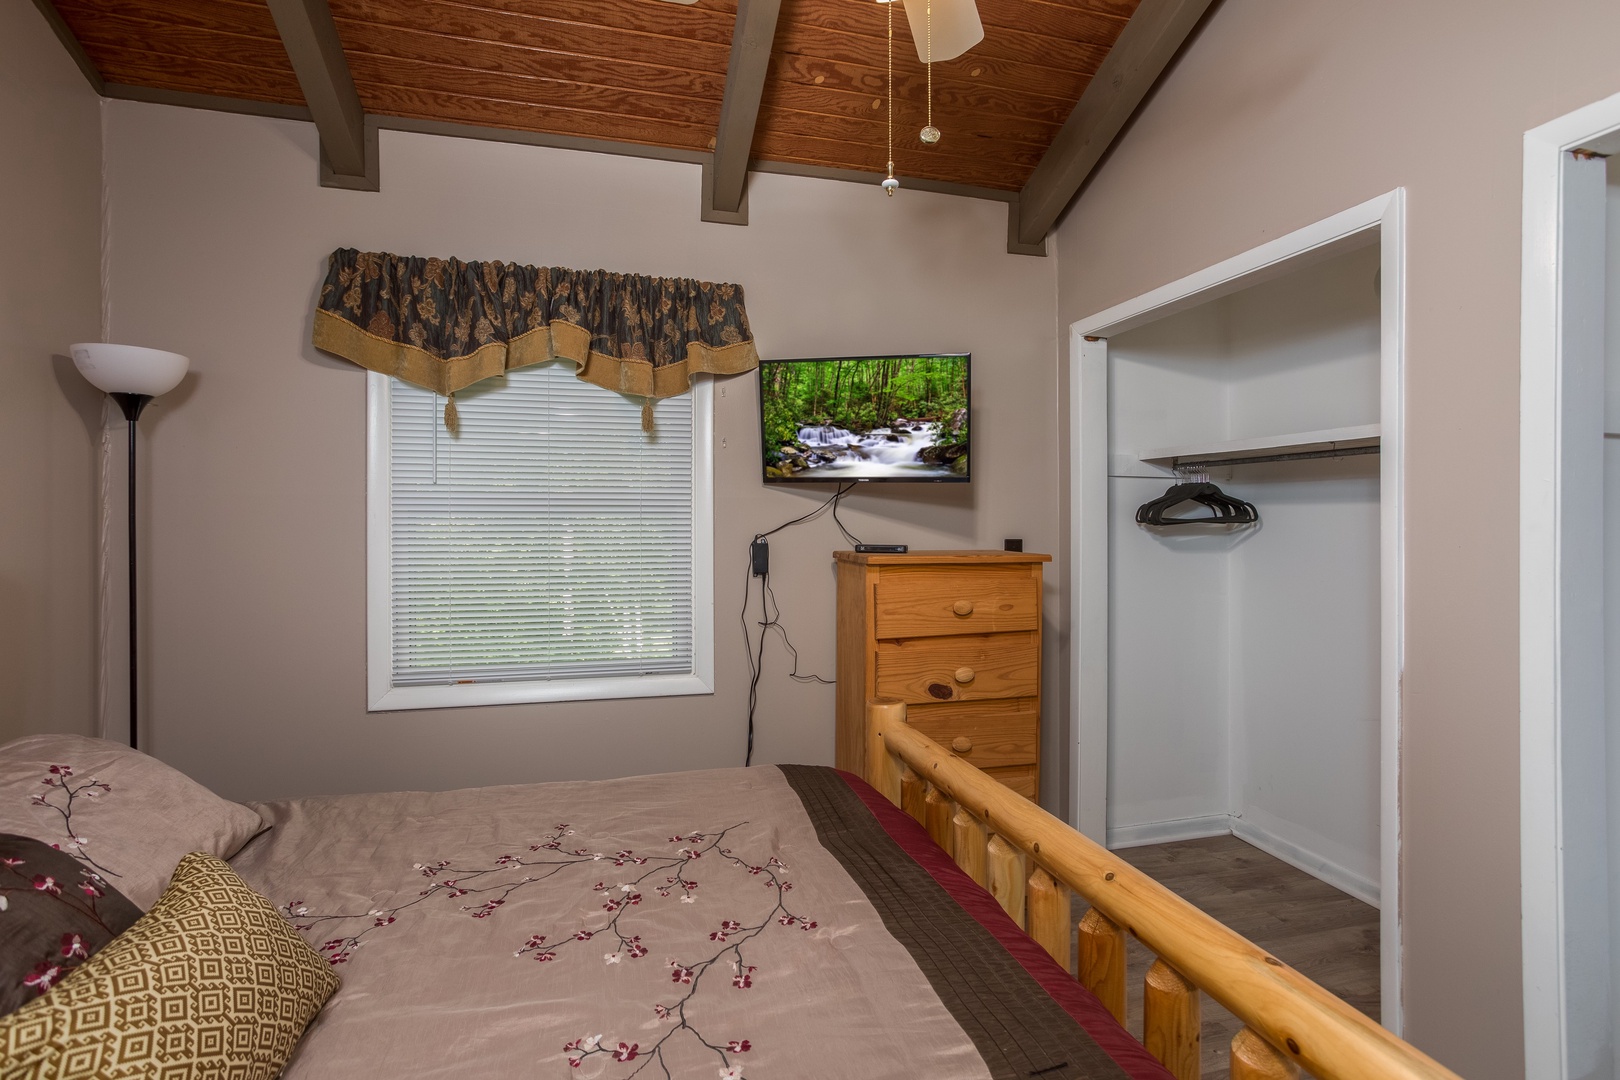 Closet, dresser, and TV in a bedroom at Forever Country, a 3 bedroom cabin rental located in Pigeon Forge